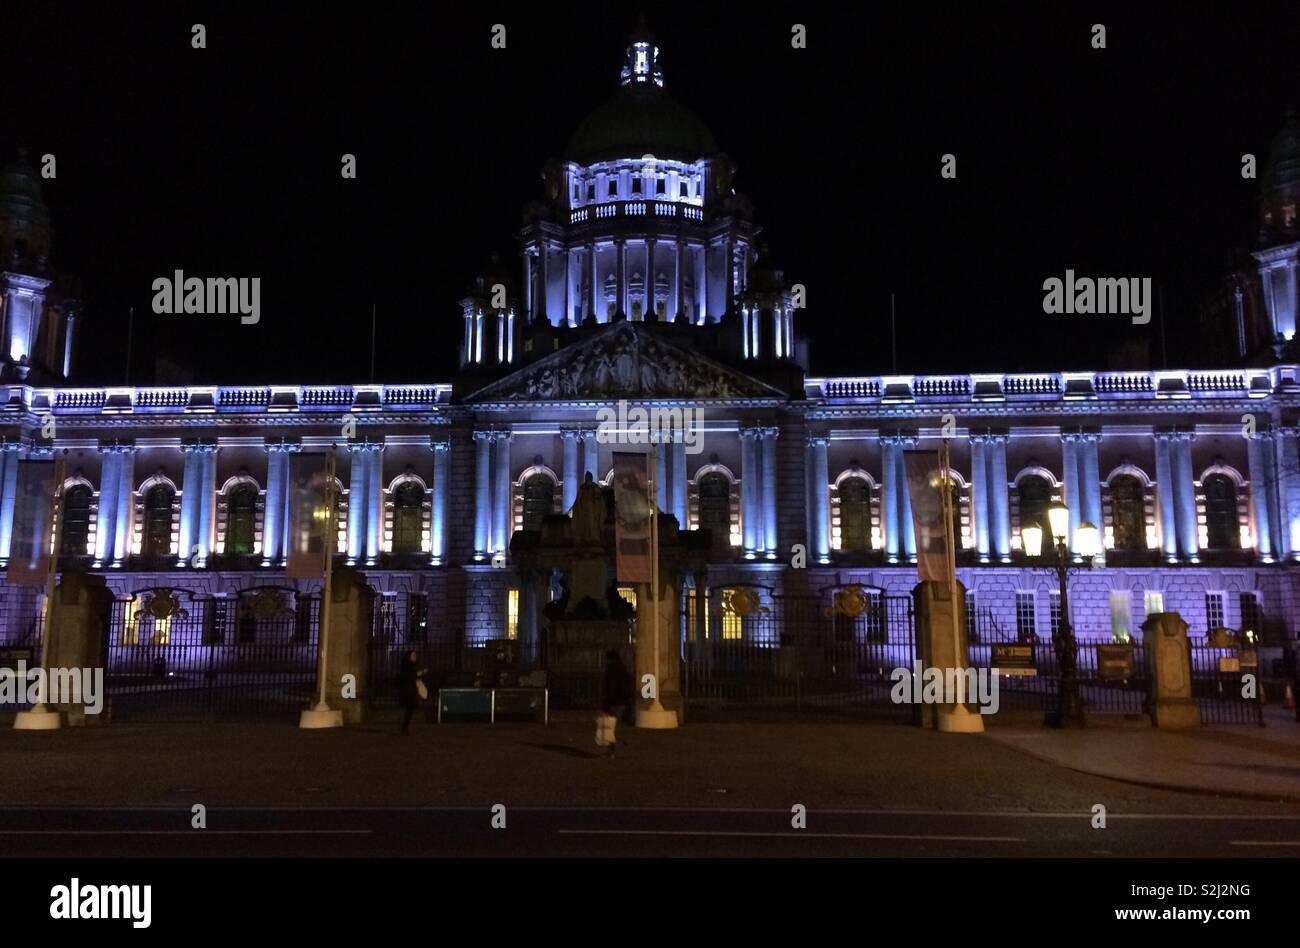 Belfast City Hall, Northern Ireland at night-a listed building, completed in 1906 and renovated 2009. This majestic building is often lit imaginatively at night. Inside are many fine features. Stock Photo